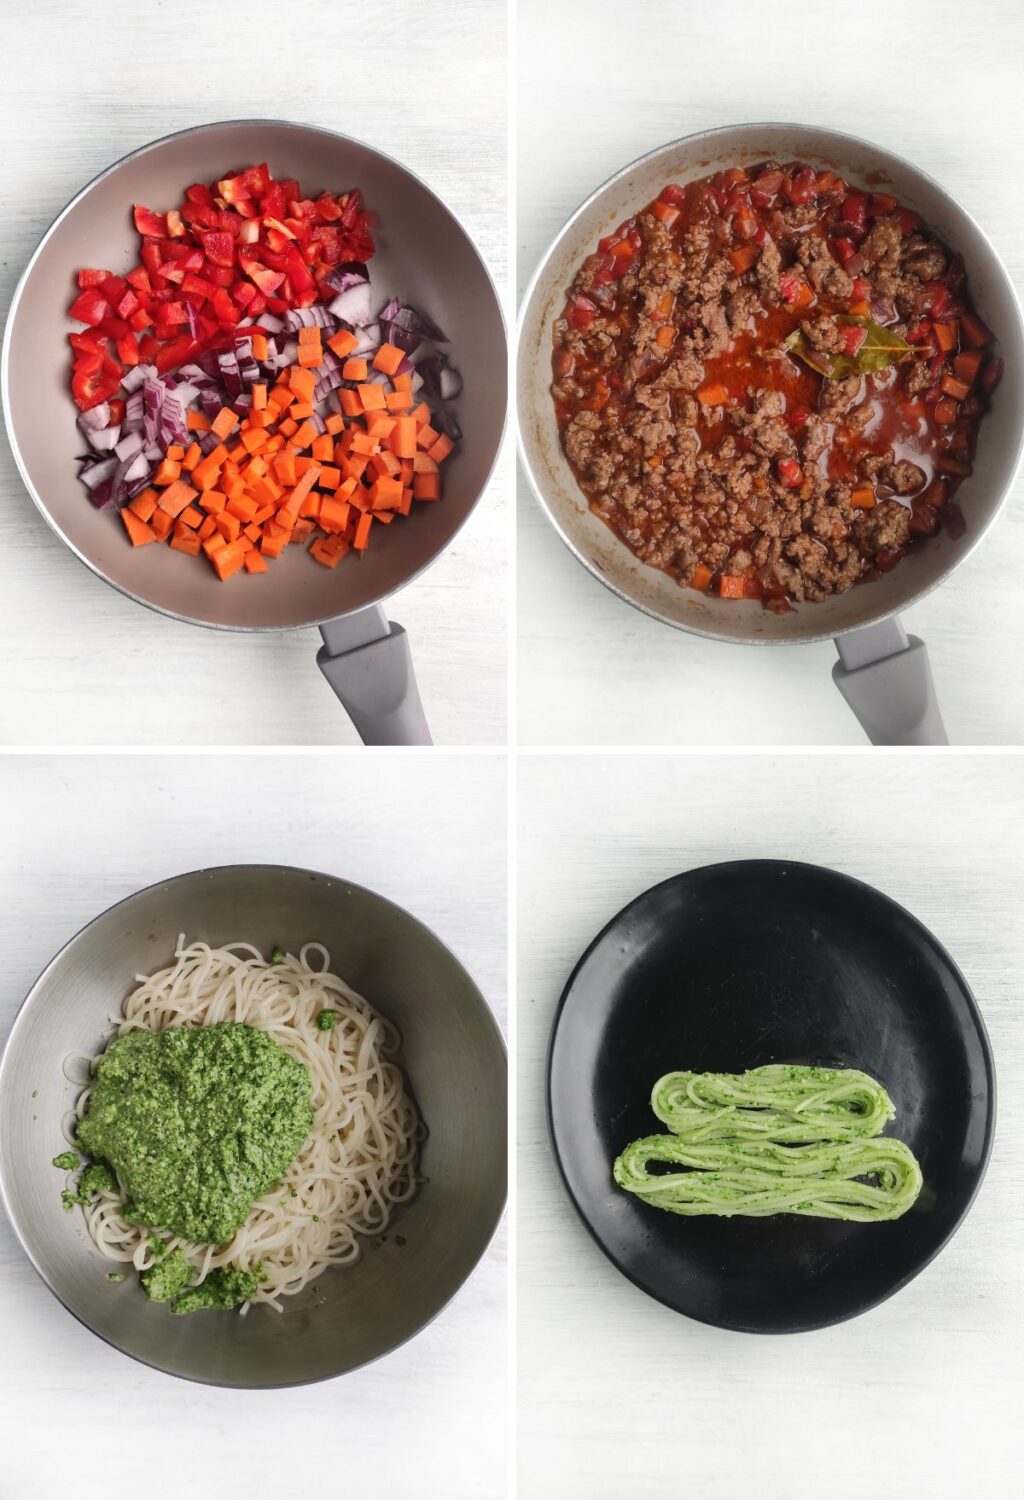 Four pictures showing how to make spaghetti and meatballs.